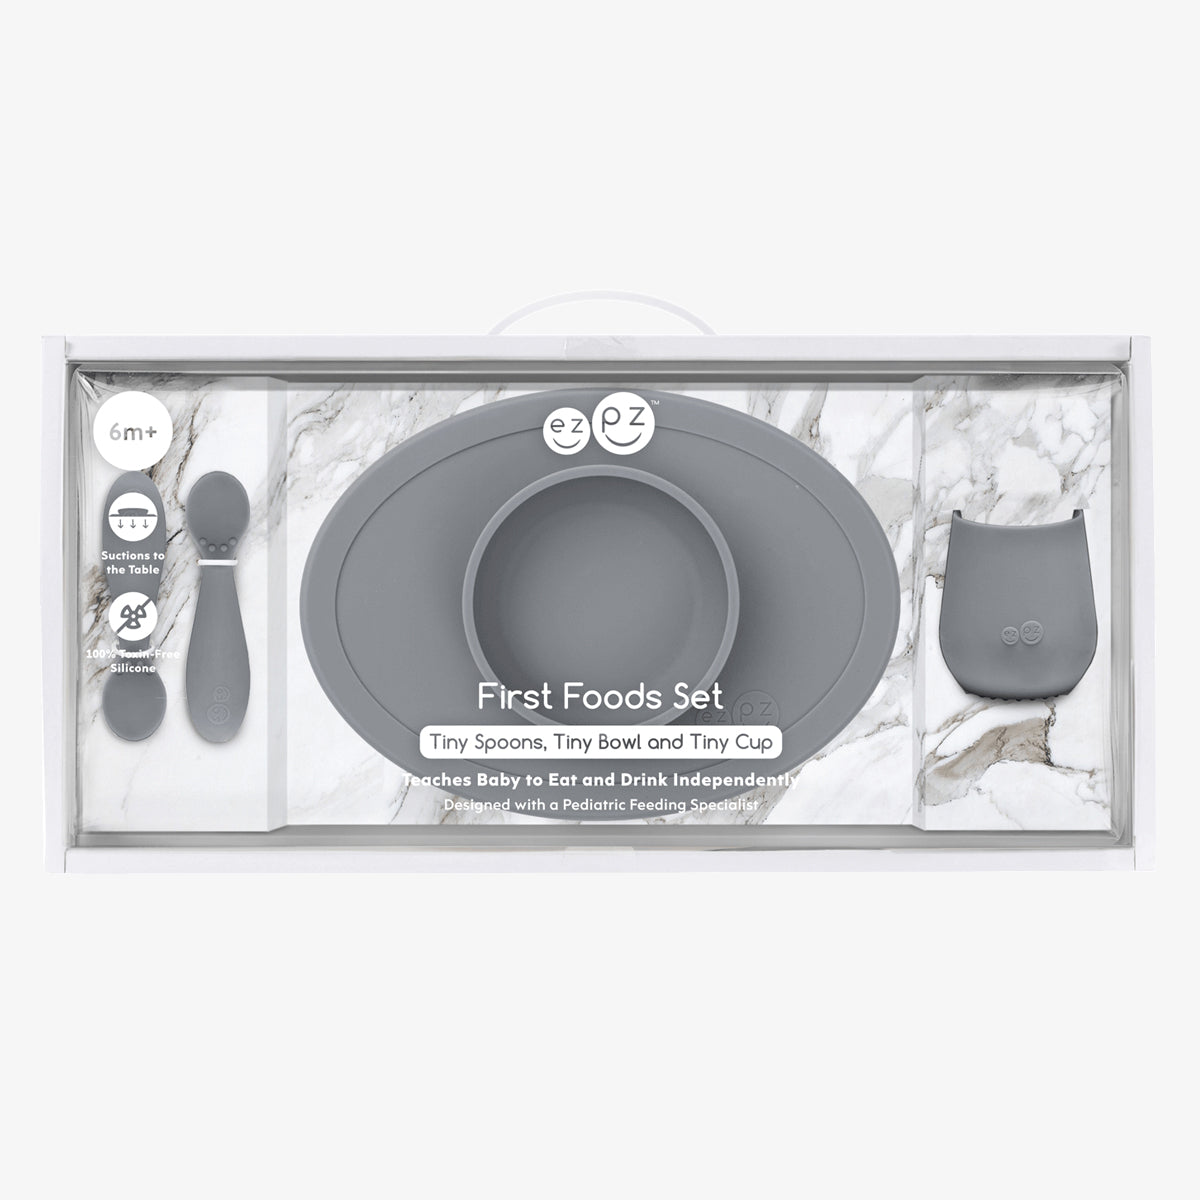 First Foods Set in Gray by ezpz / The Original All-In-One Silicone Plates & Placemats that Stick to the Table